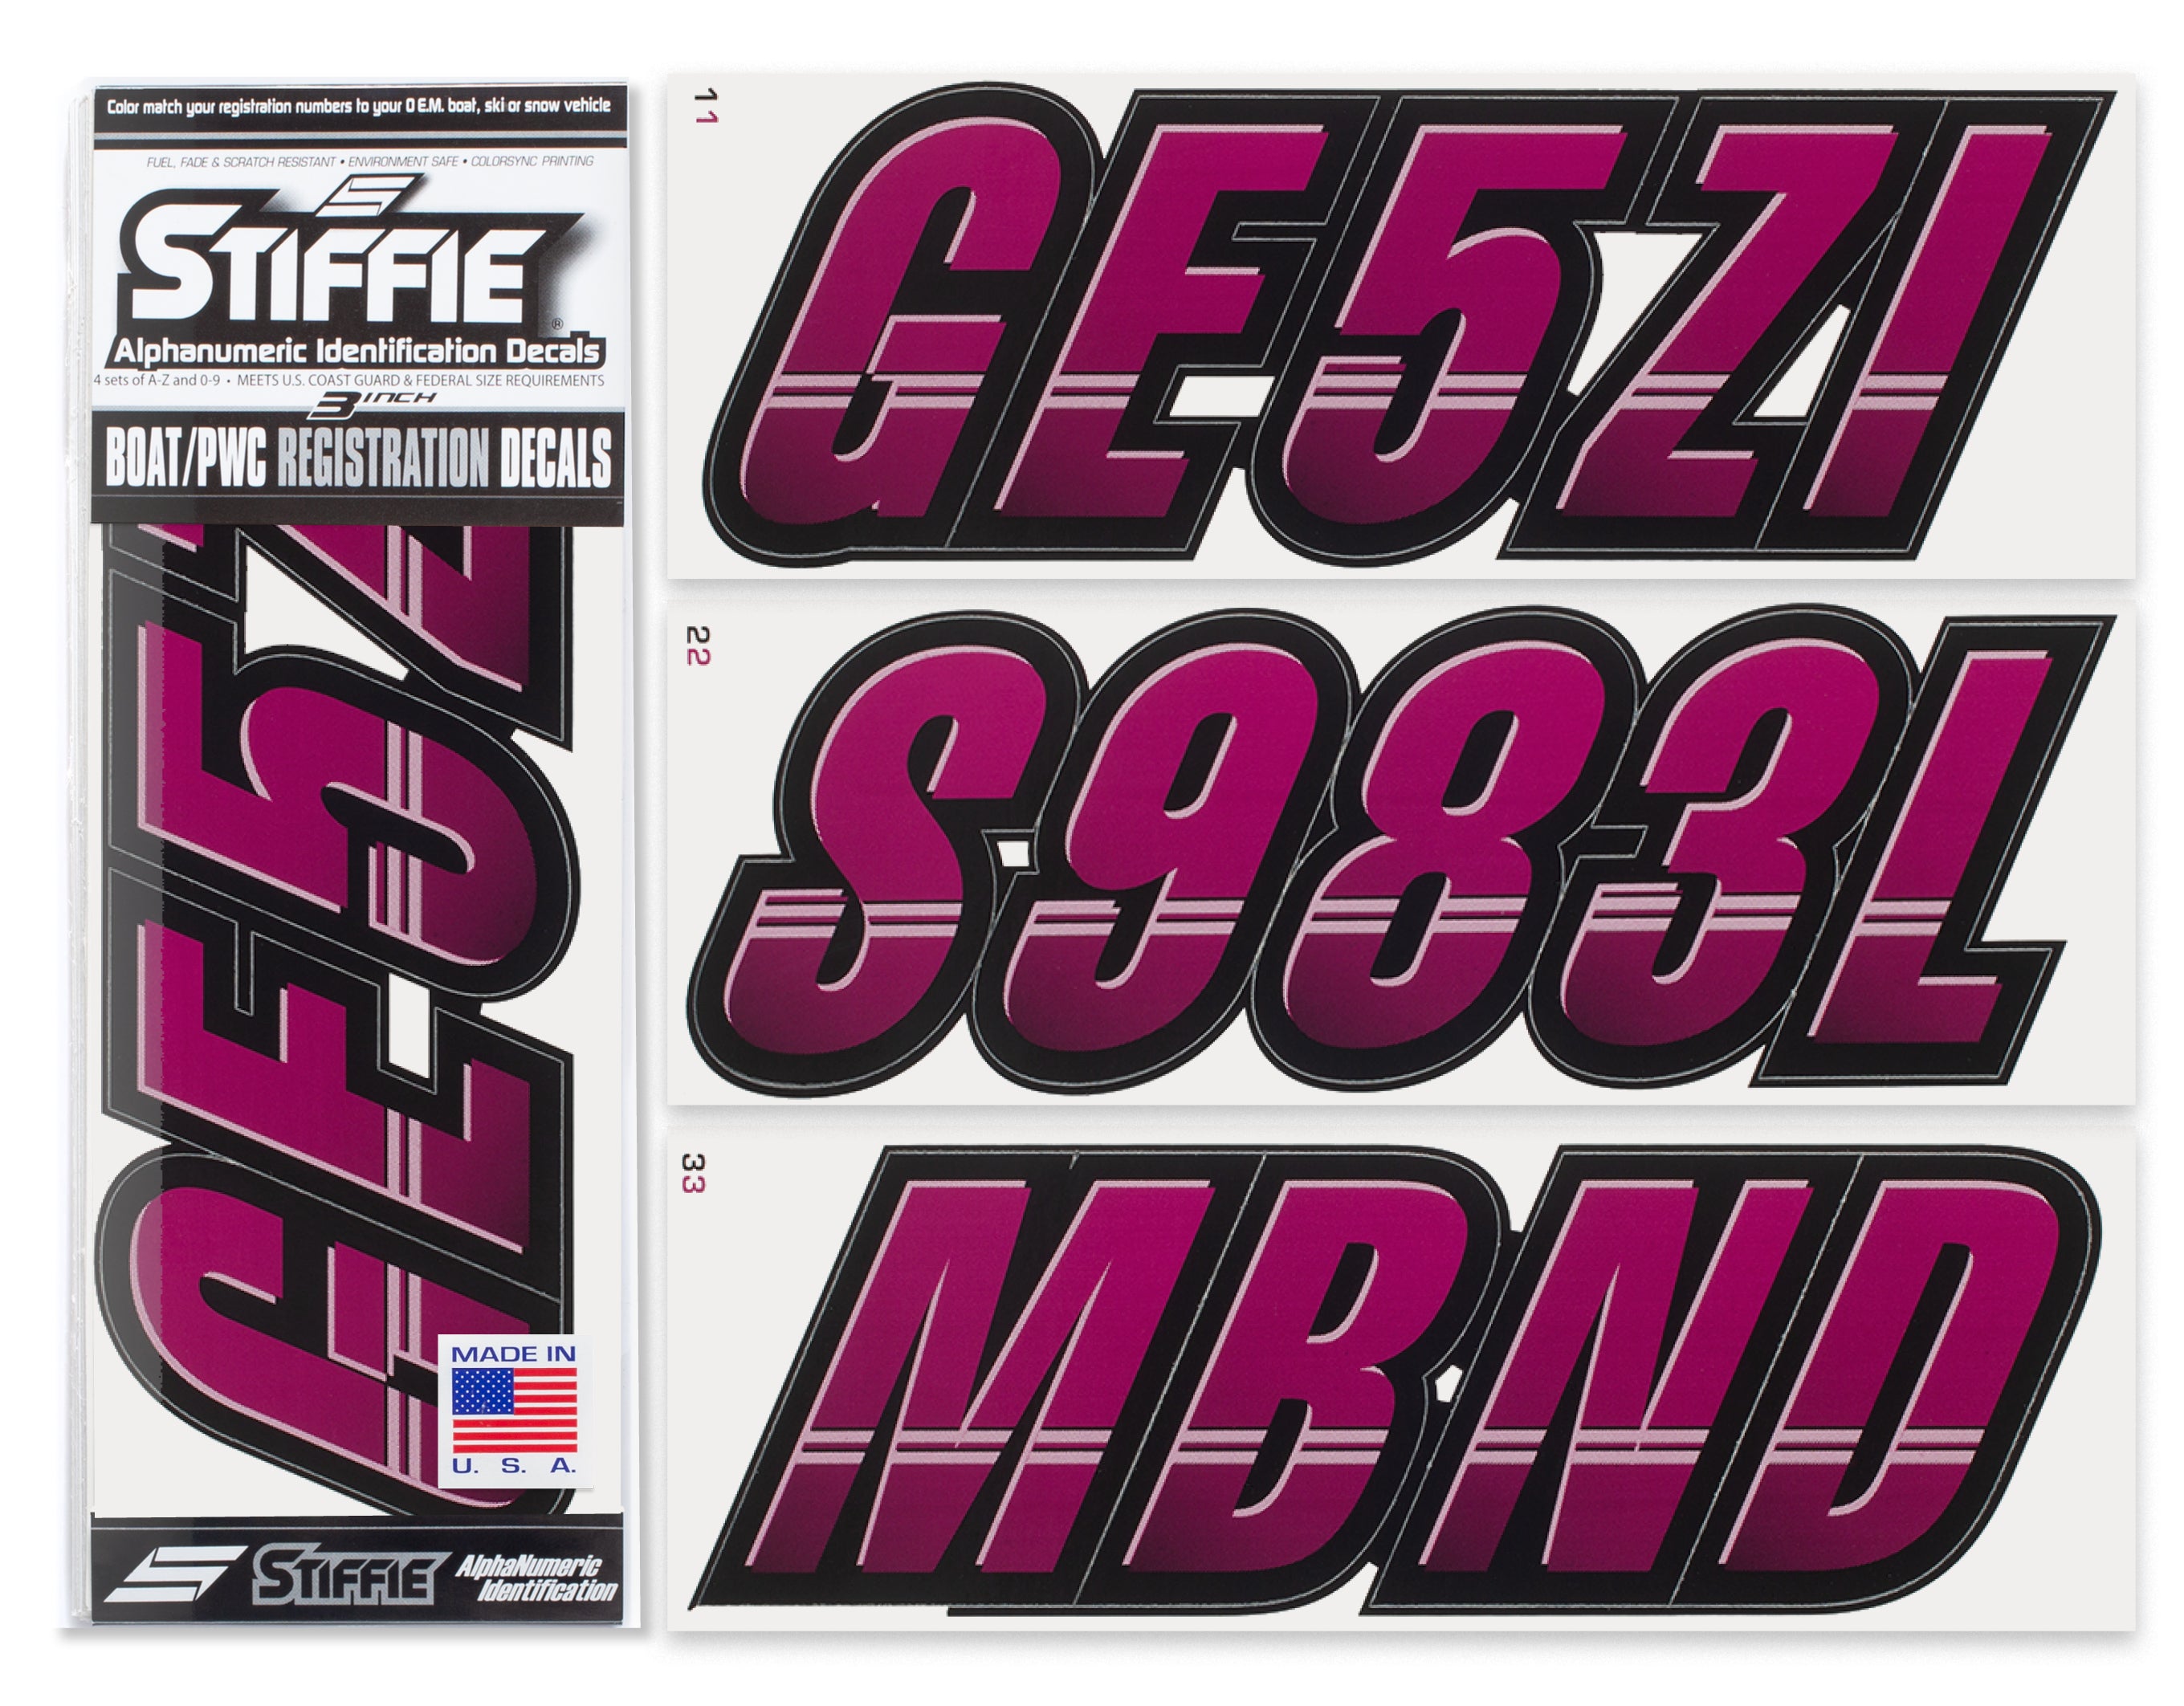 Stiffie Techtron Wine/Black 3" Alpha-Numeric Registration Identification Numbers Stickers Decals for Boats & Personal Watercraft